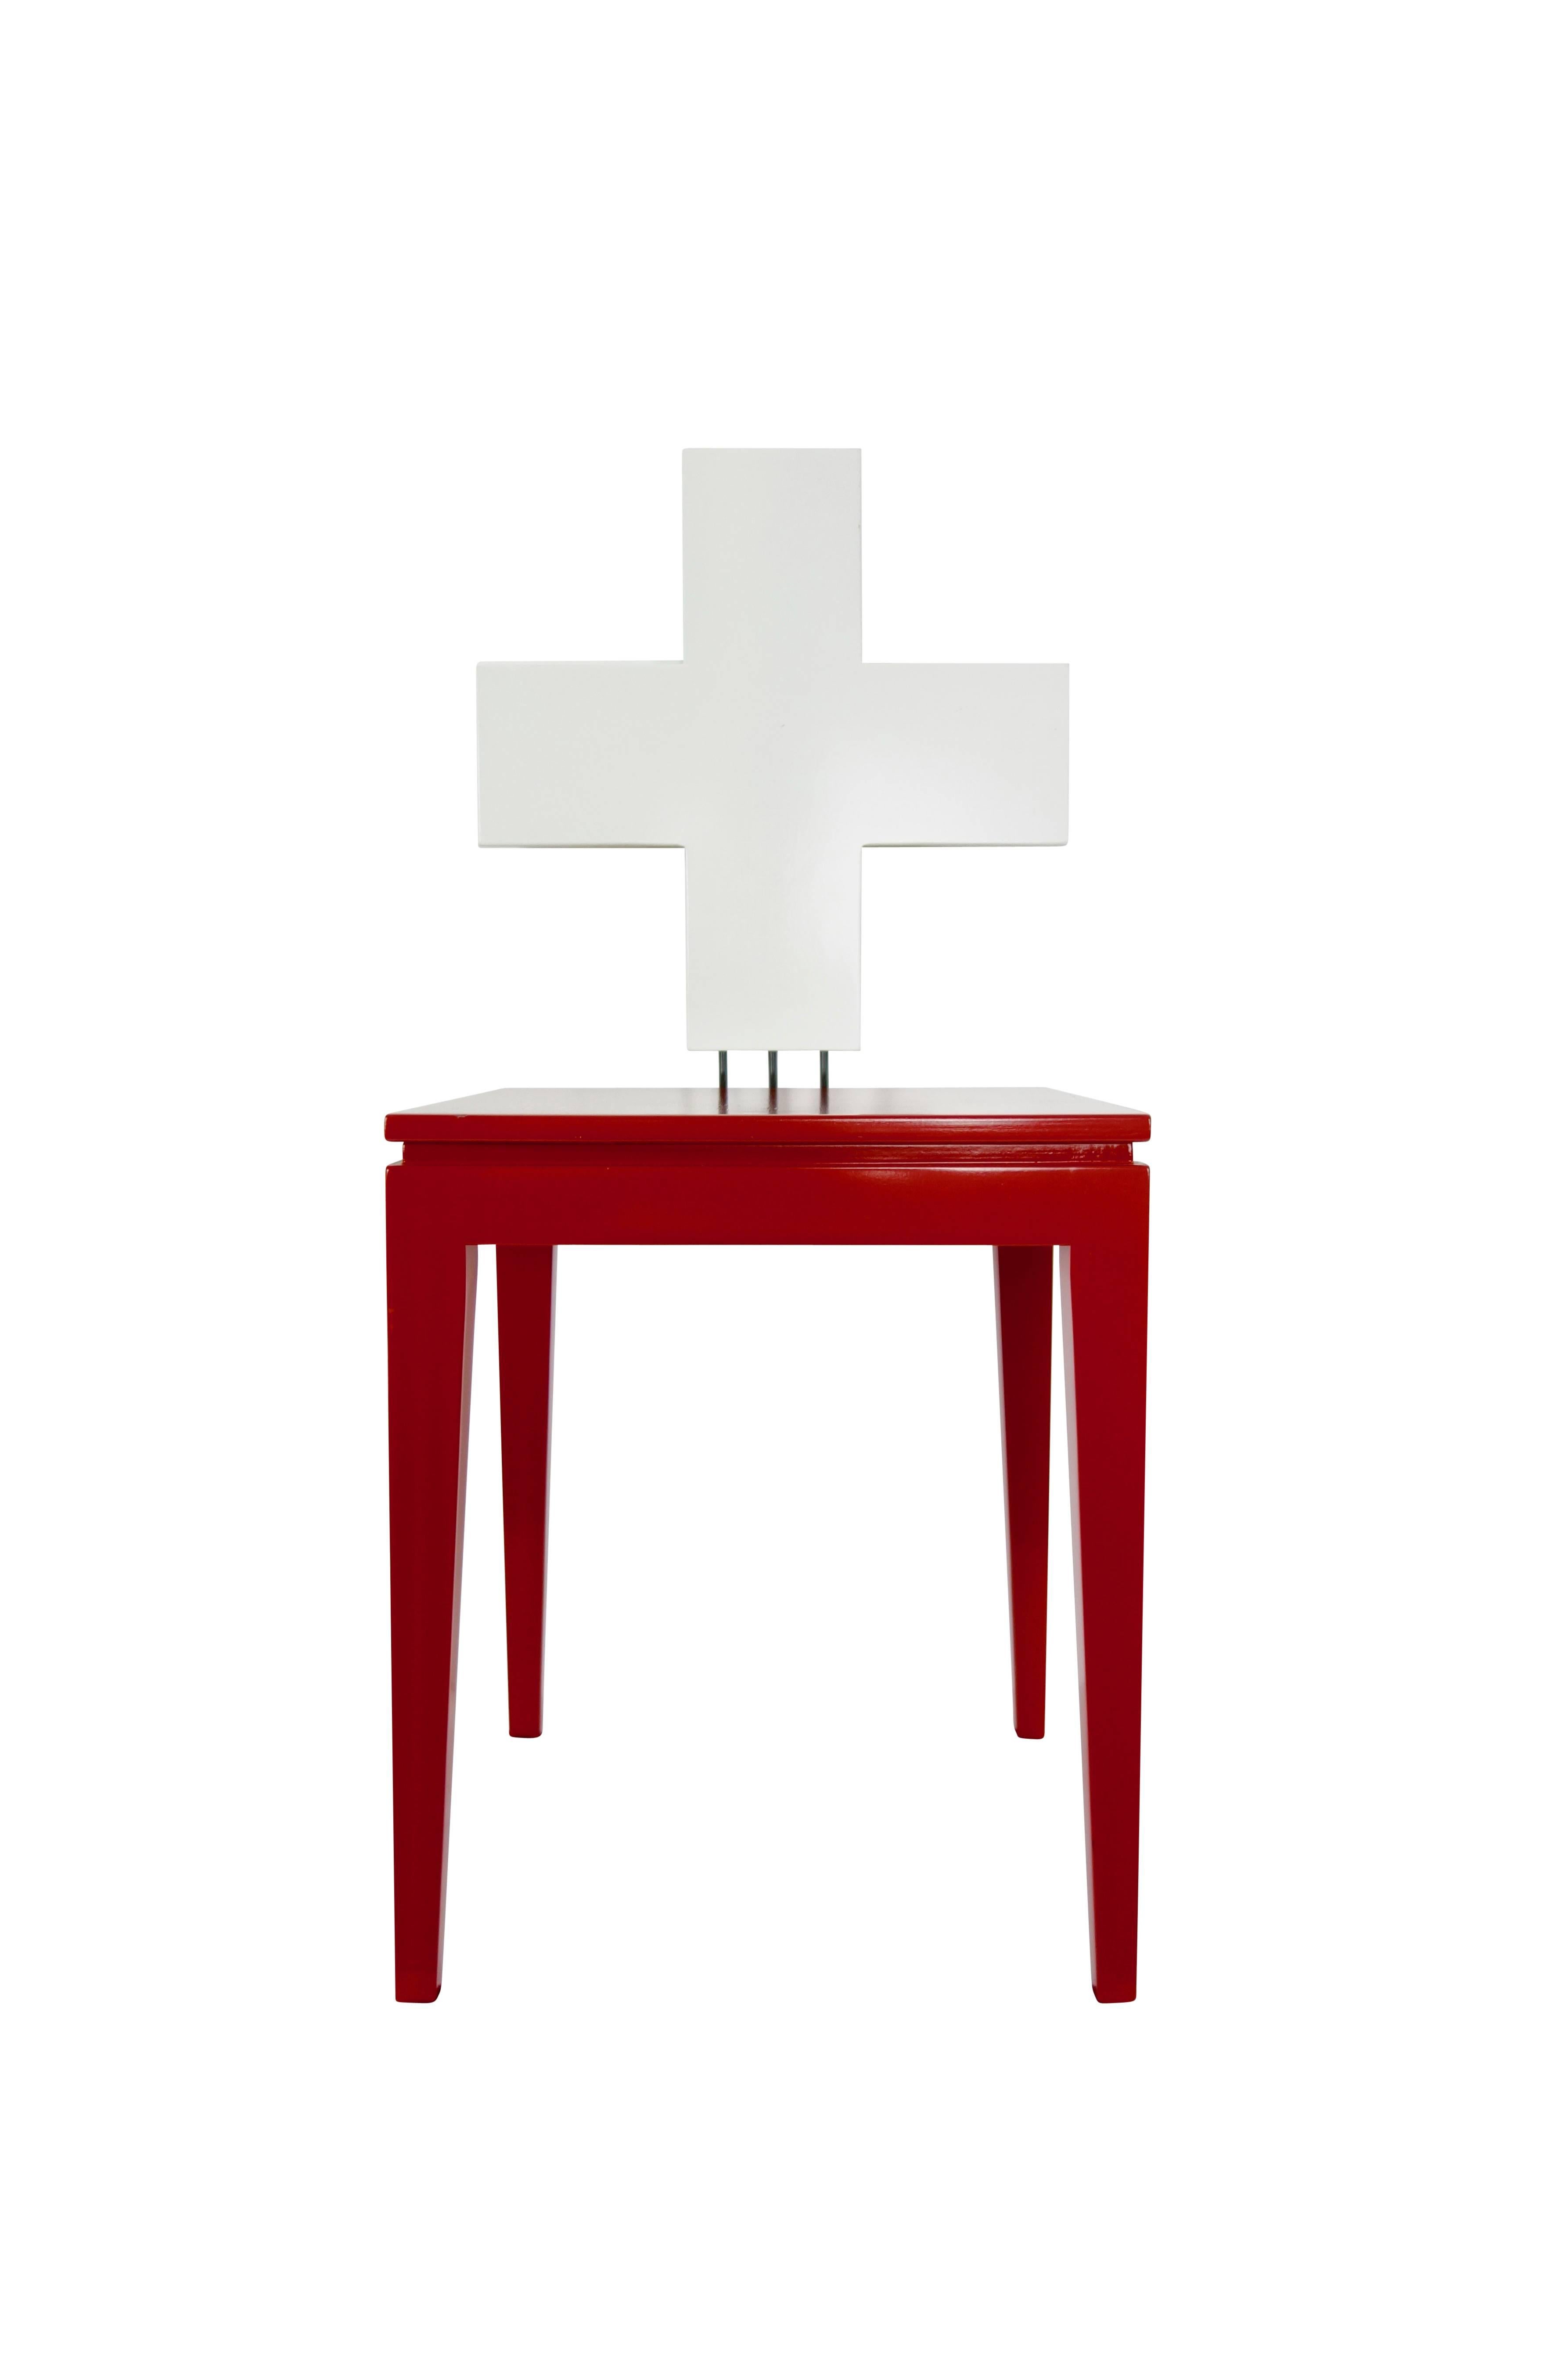 This is the “Schwiiz” chair made for Switzerland’s 700th Independence Day, designed by Reto Kaufmann and produced by Horgenglarus. Made of red and white varnished beech in Zurich, circa 1991.